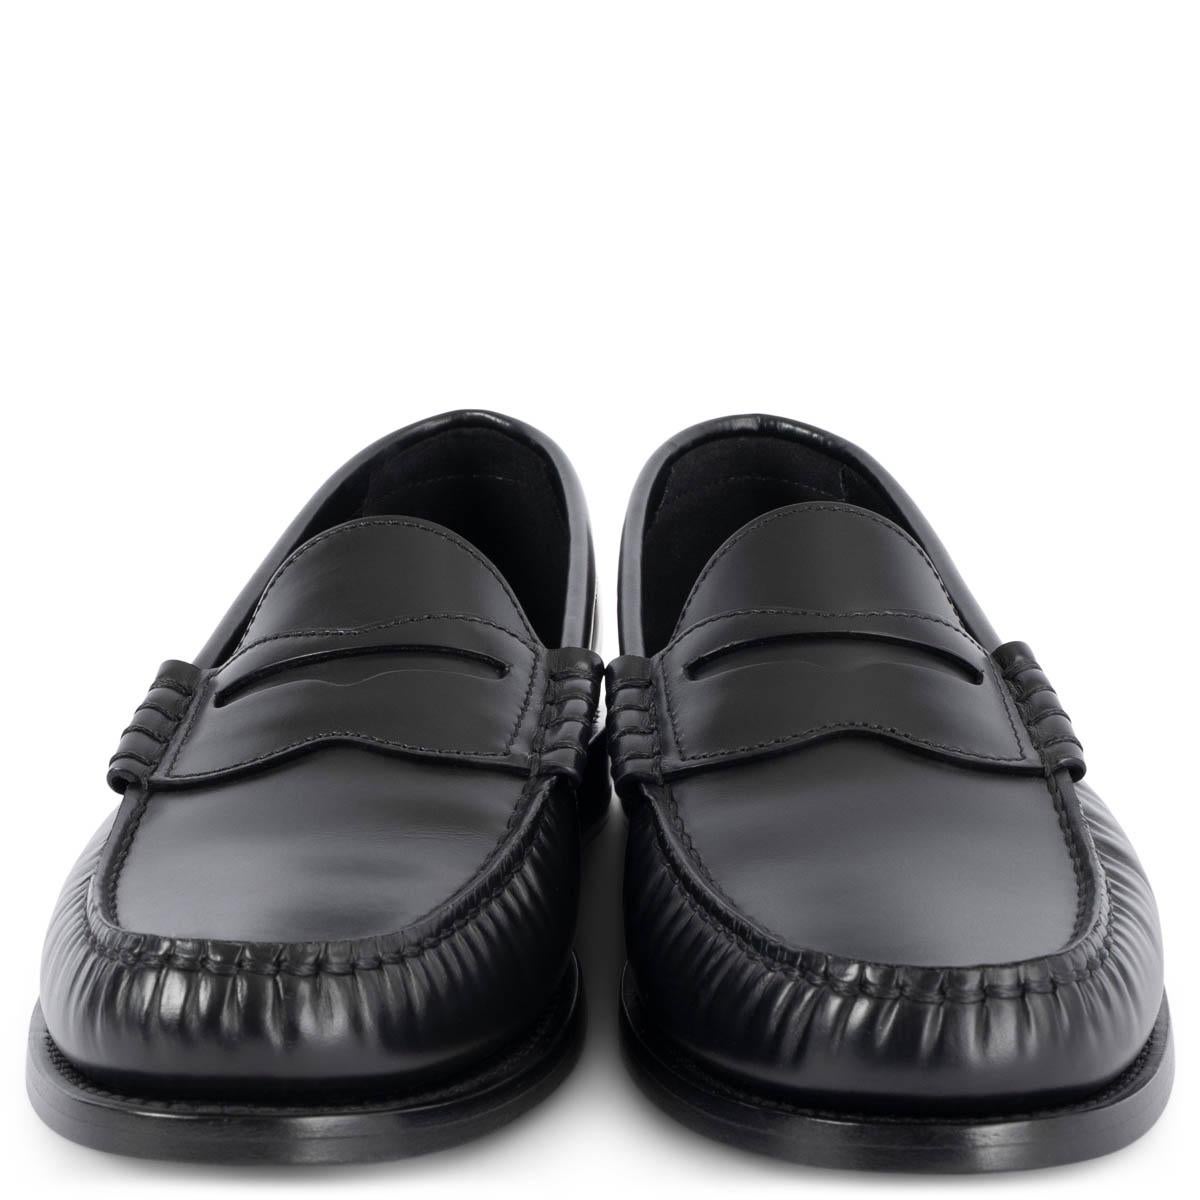 100% authentic Celine Luco loafers in black polished calfskin. Have been worn once inside and are in virtually new condition.

Measurements
Imprinted Size	38.5
Shoe Size	38.5
Inside Sole	25.5cm (9.9in)
Width	8cm (3.1in)
Heel	2cm (0.8in)

All our